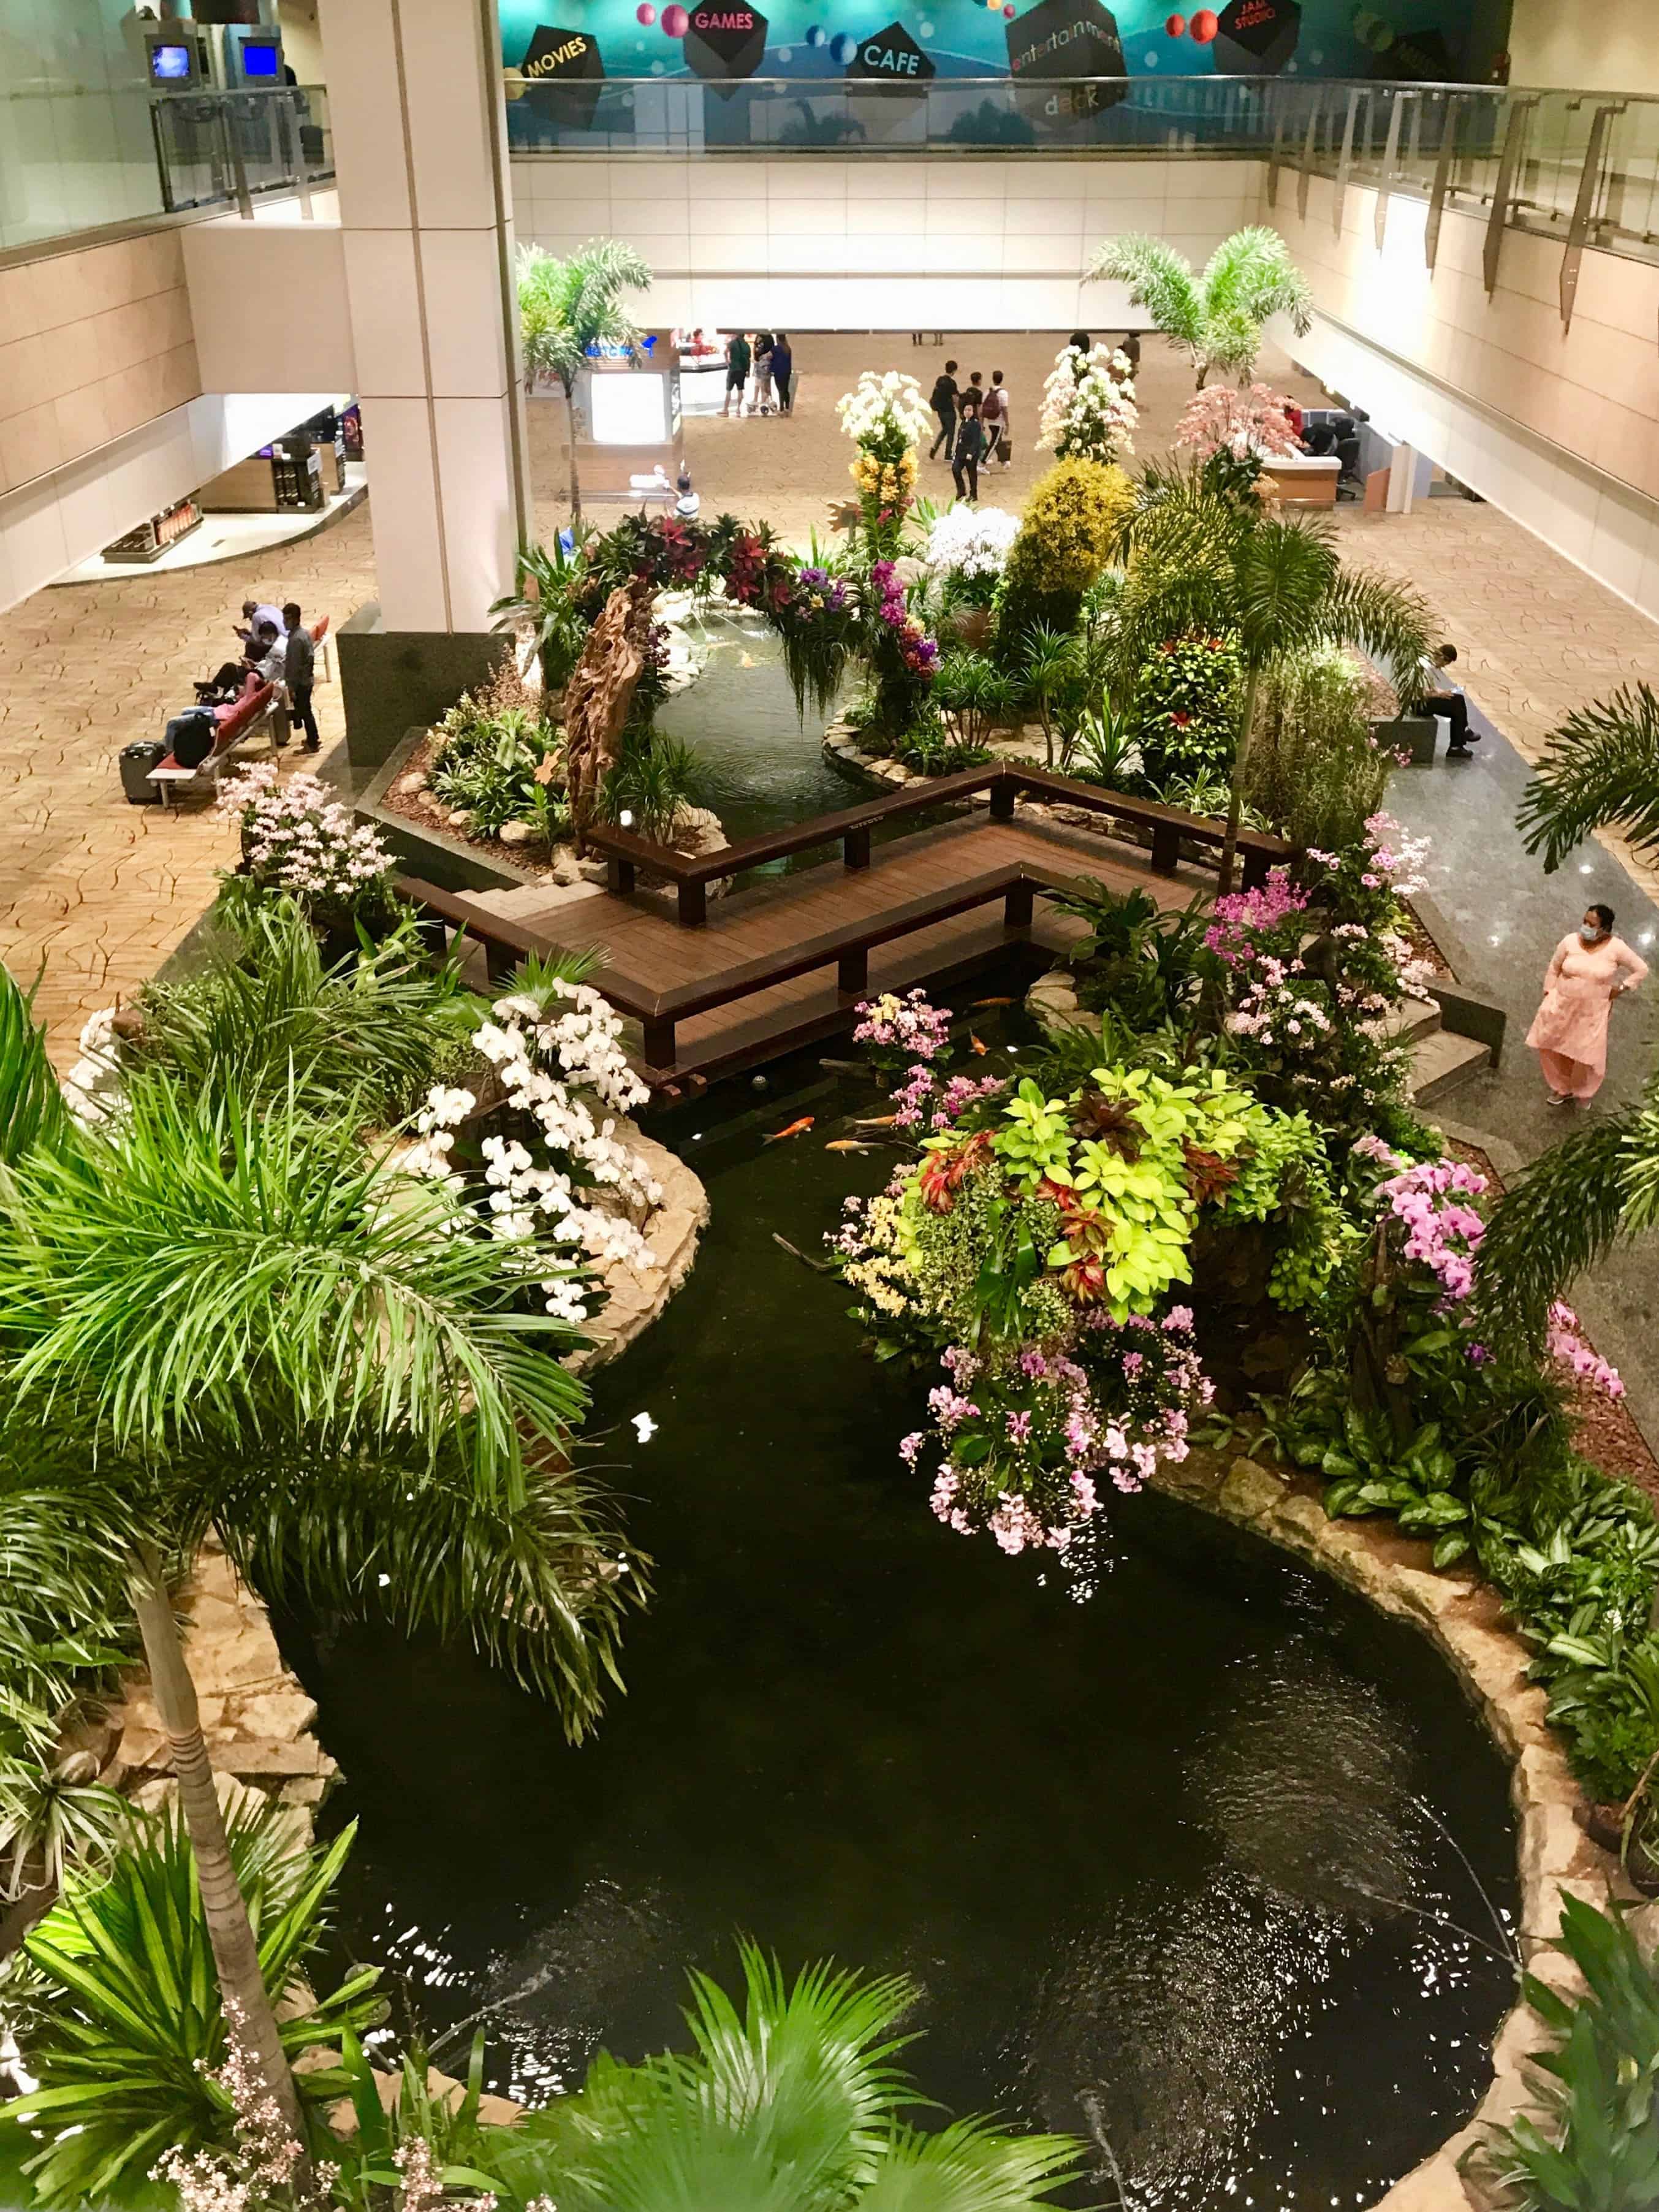 One of Changi Airport's many green spots